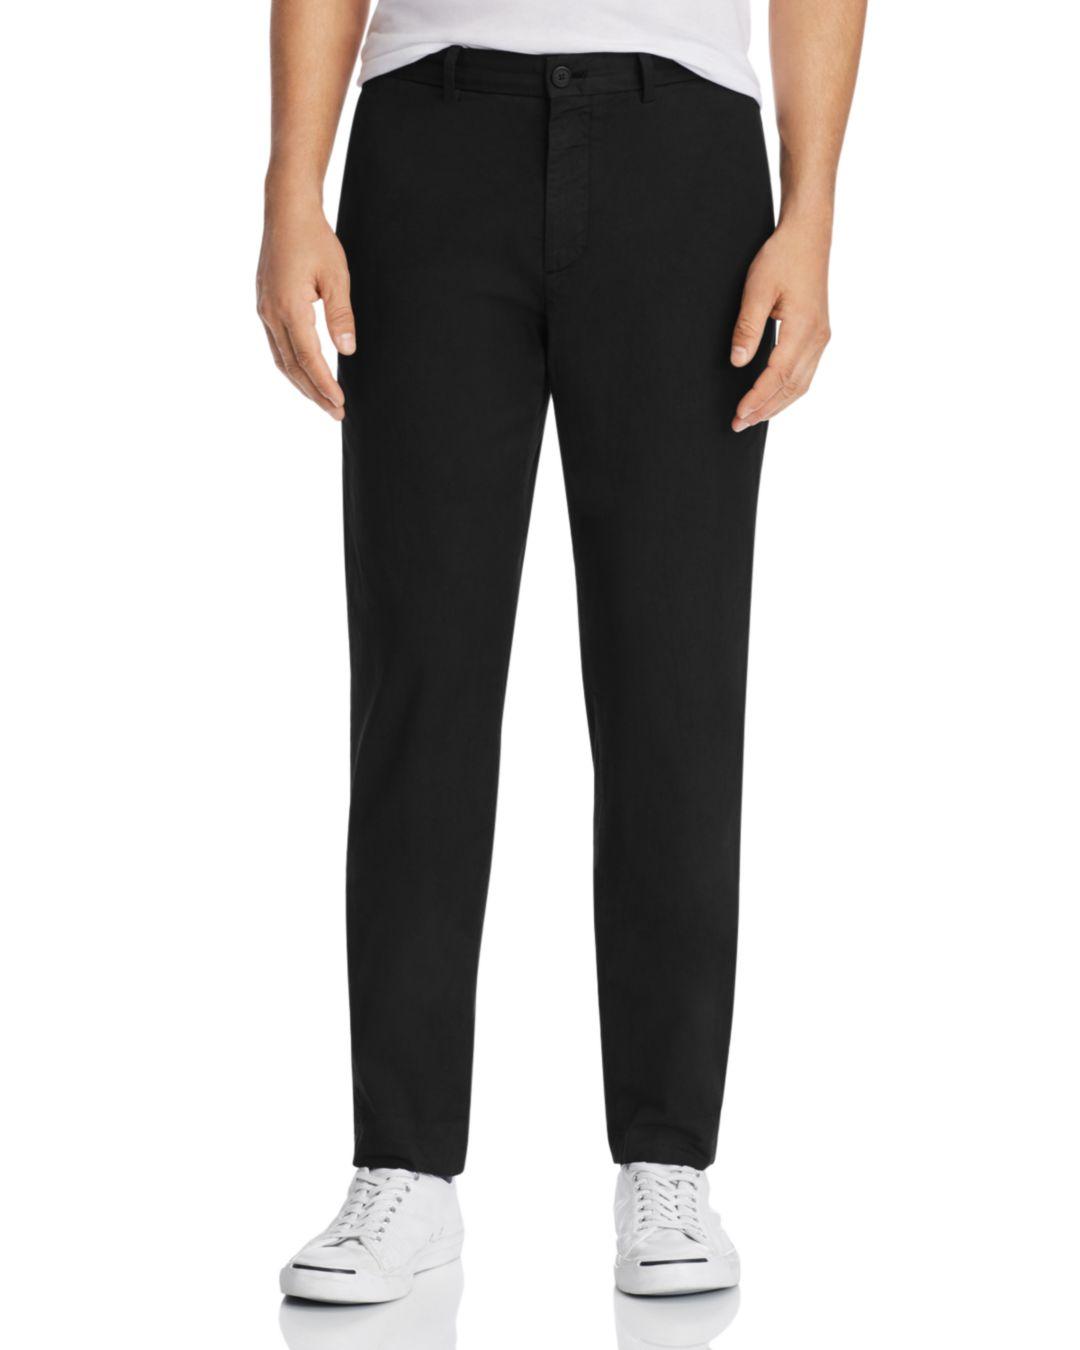 Theory Blake Patton Regular Fit Pants in Black for Men - Lyst